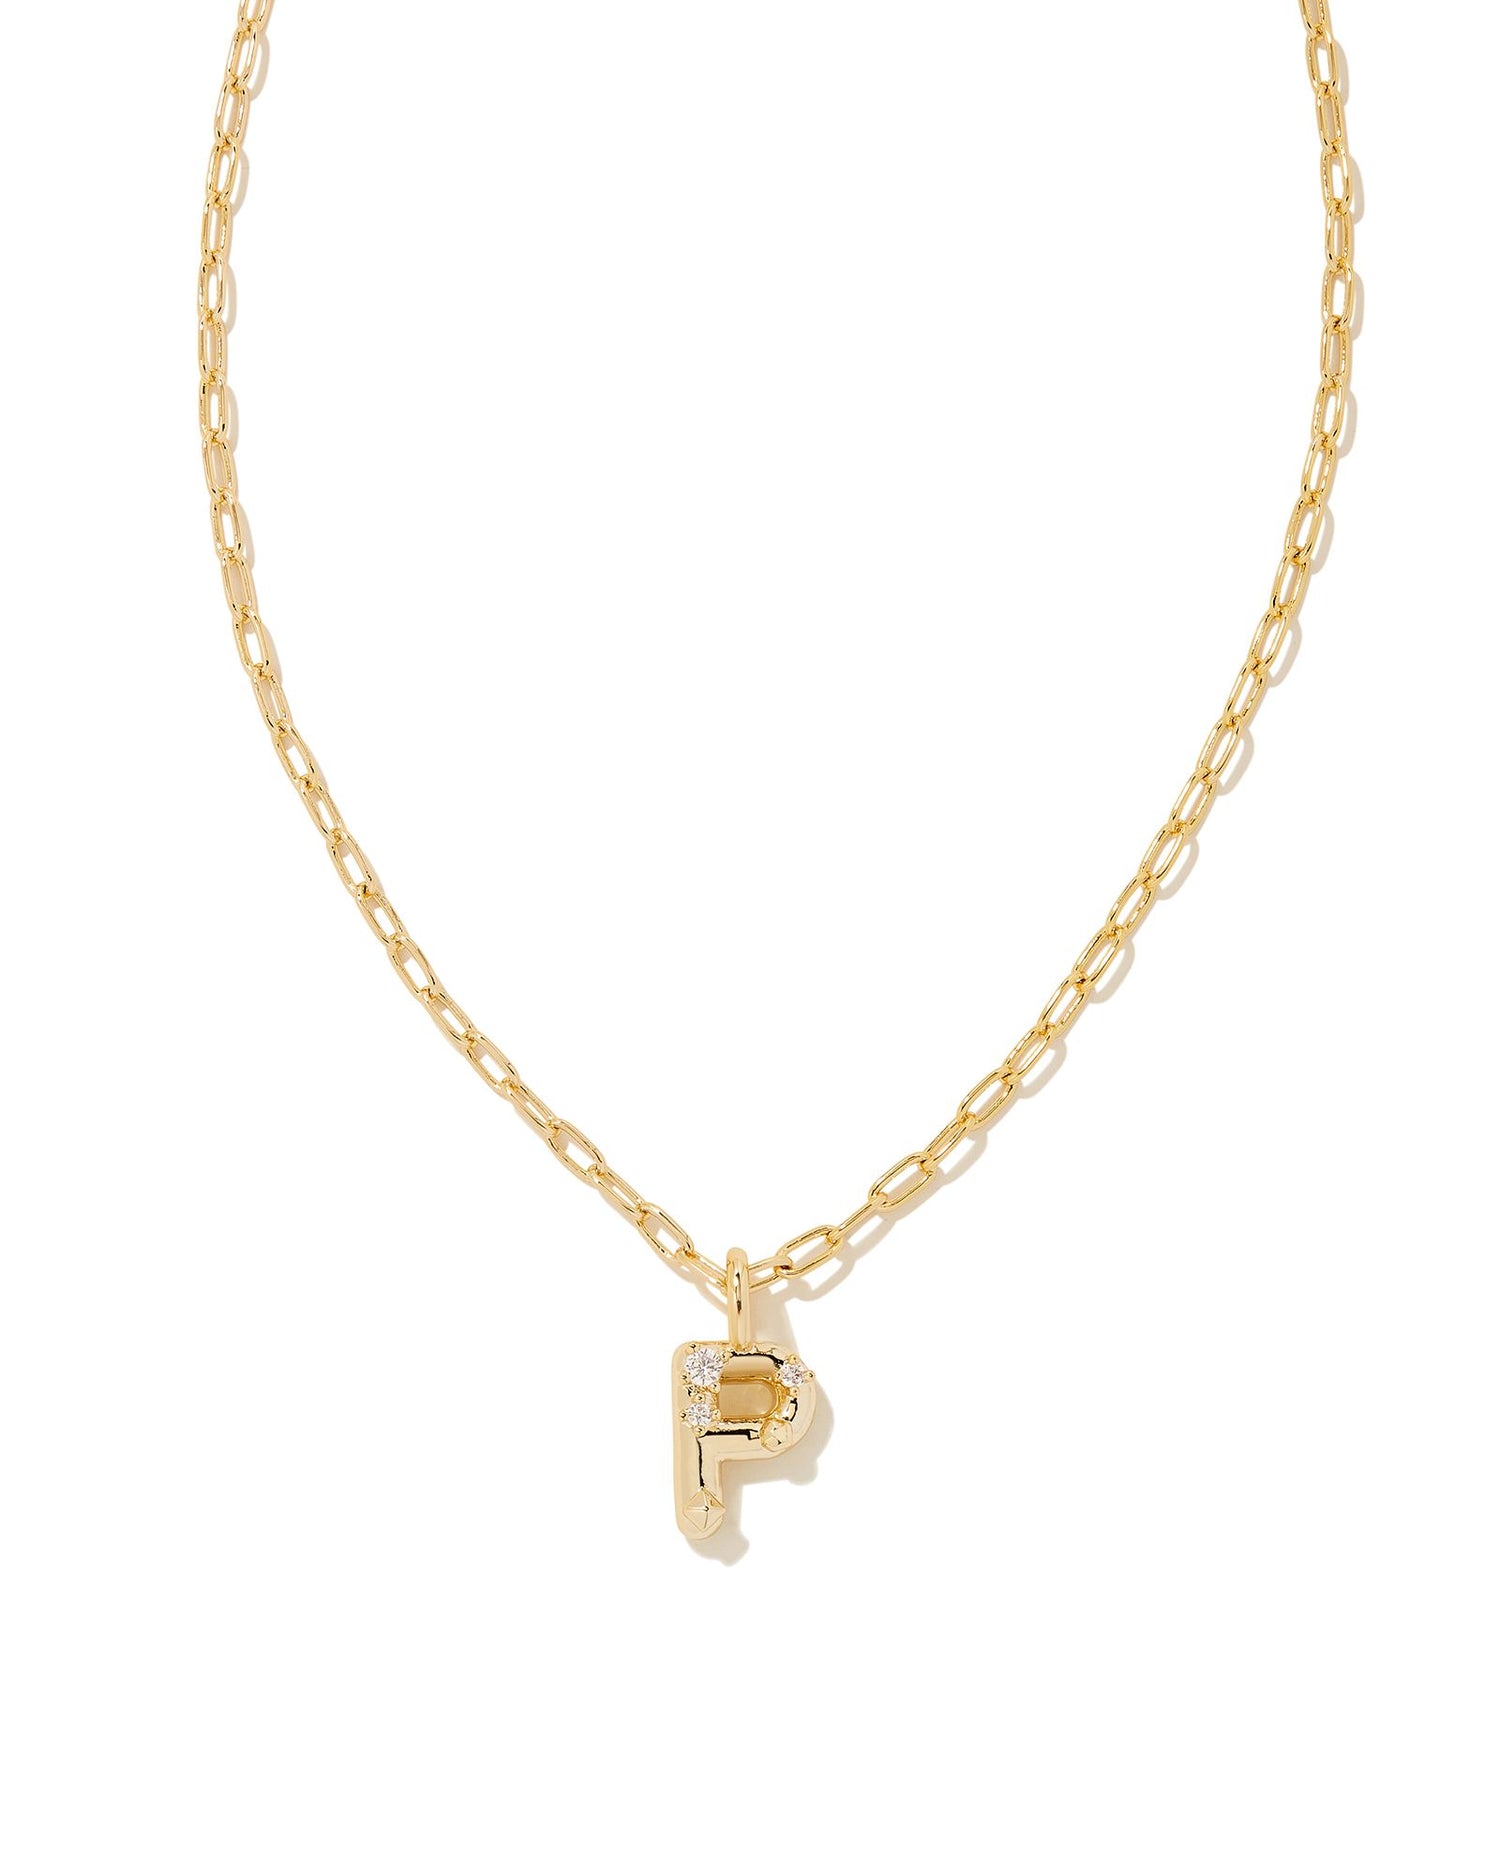 Personalize your everyday look with the Crystal Letter Short Pendant Necklace in White Crystal. Whether you’re rocking your initial or a loved one’s, this sentimental layer is one you’ll keep coming back to again and again.  Dimensions- 16' CHAIN WITH 3' EXTENDER, 0.62'L X 0.35"W PENDANT Metal- 14K Gold plated over brass Closure- Lobster Clasp Material-   White CZ Letter P